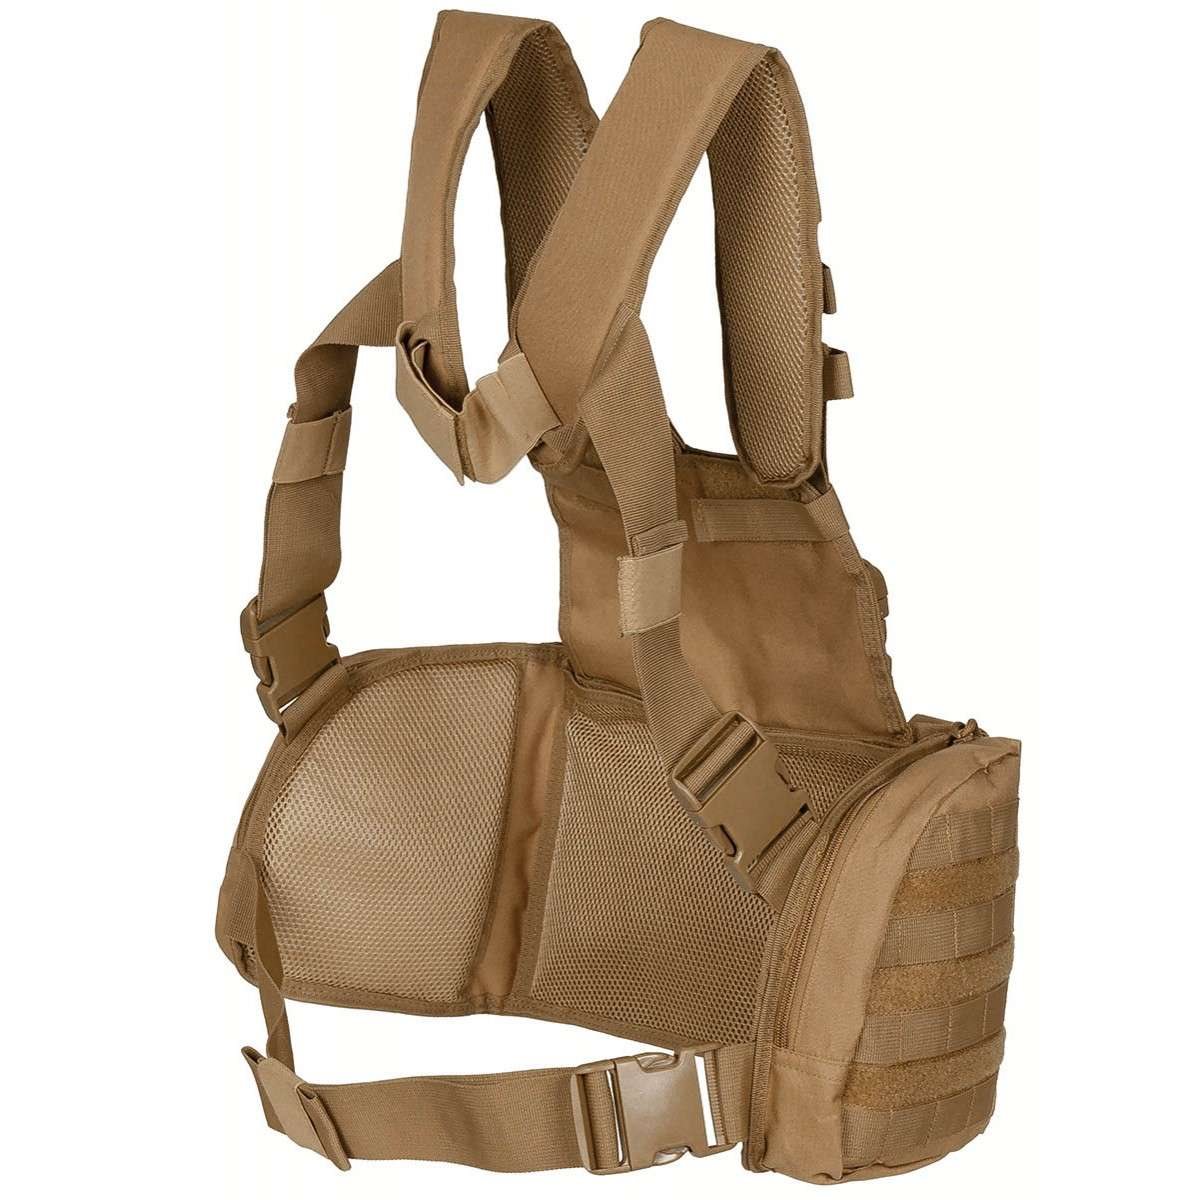 MFH int. comp. Vest chest rig MISSION COYOTE | Army surplus MILITARY RANGE